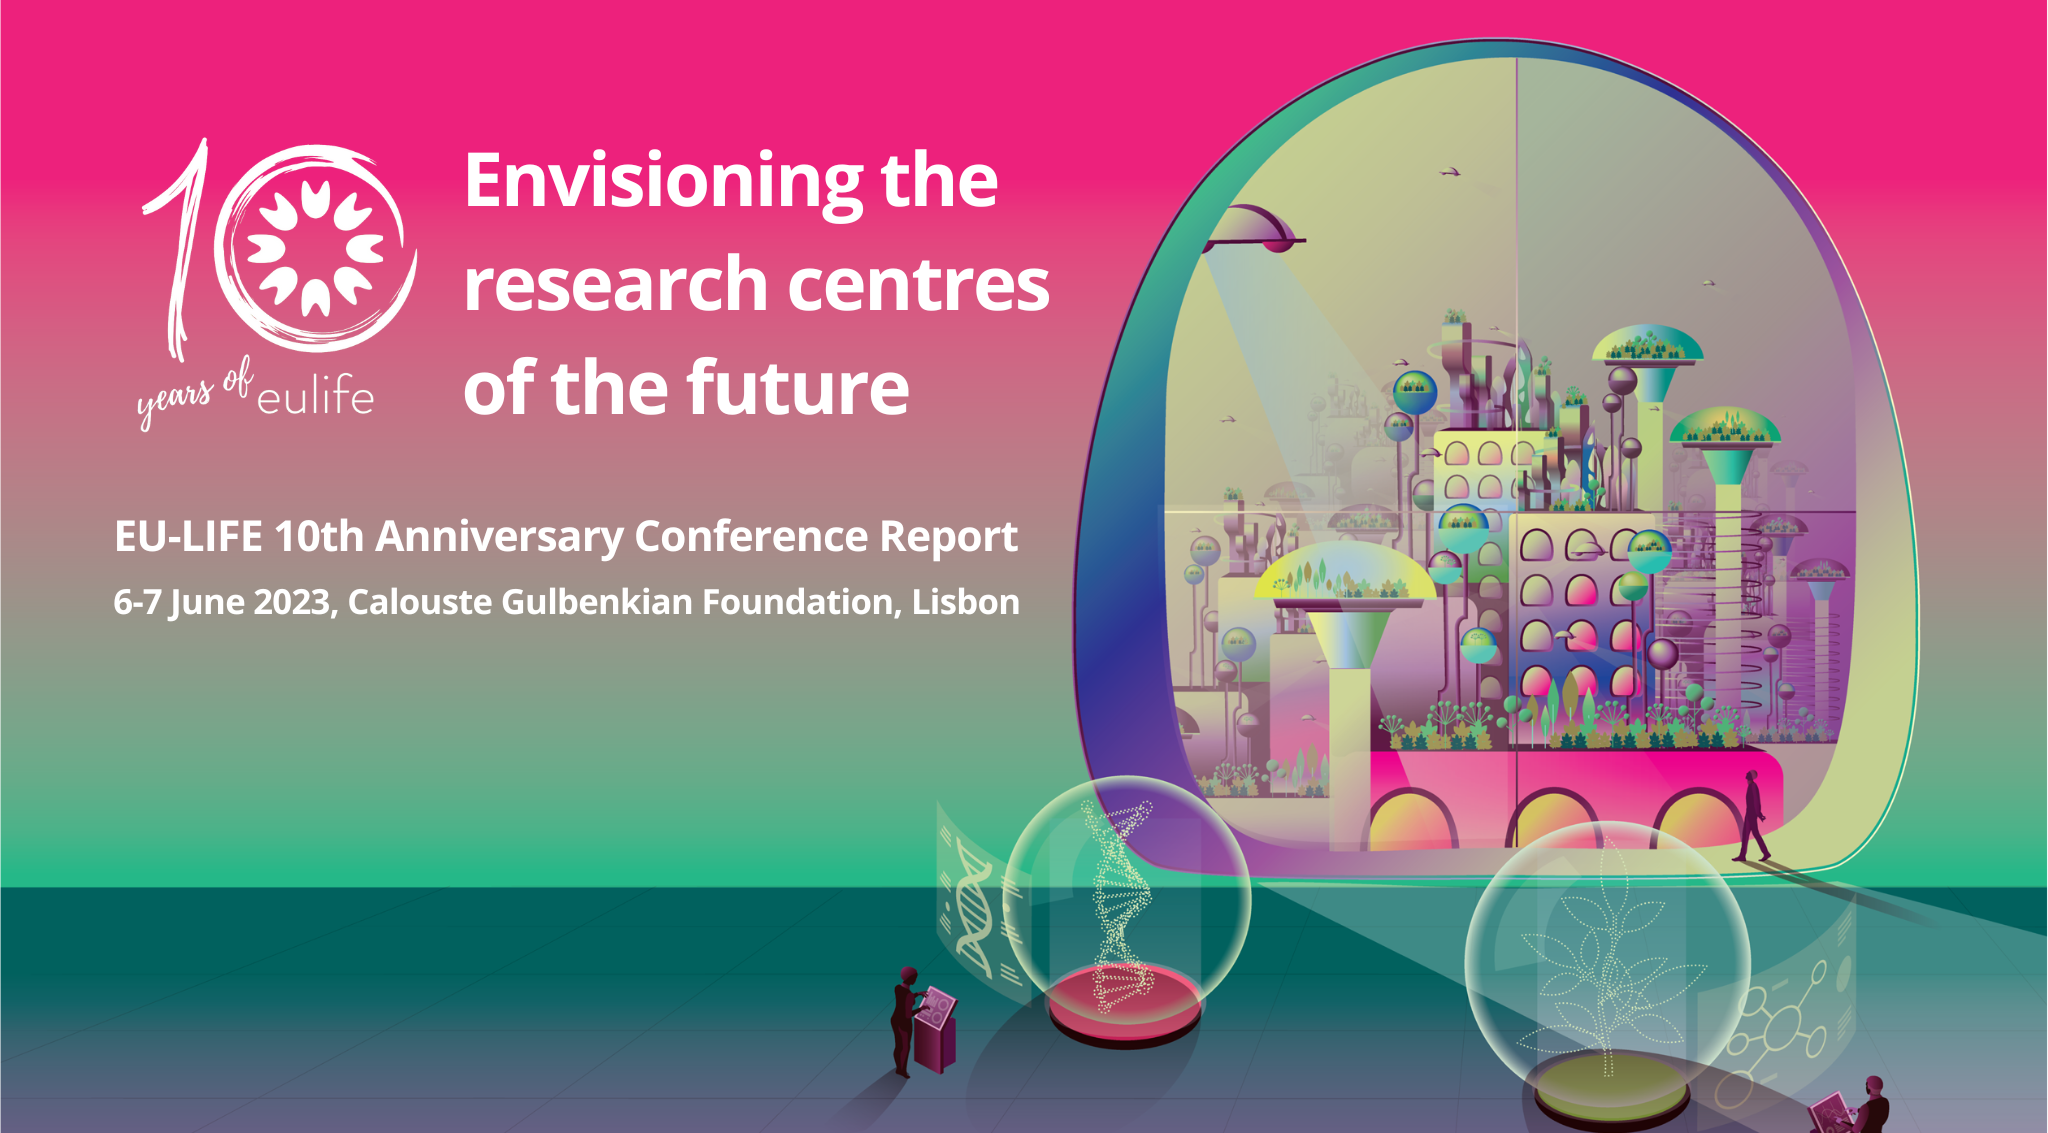 Envisioning the research centres of the future